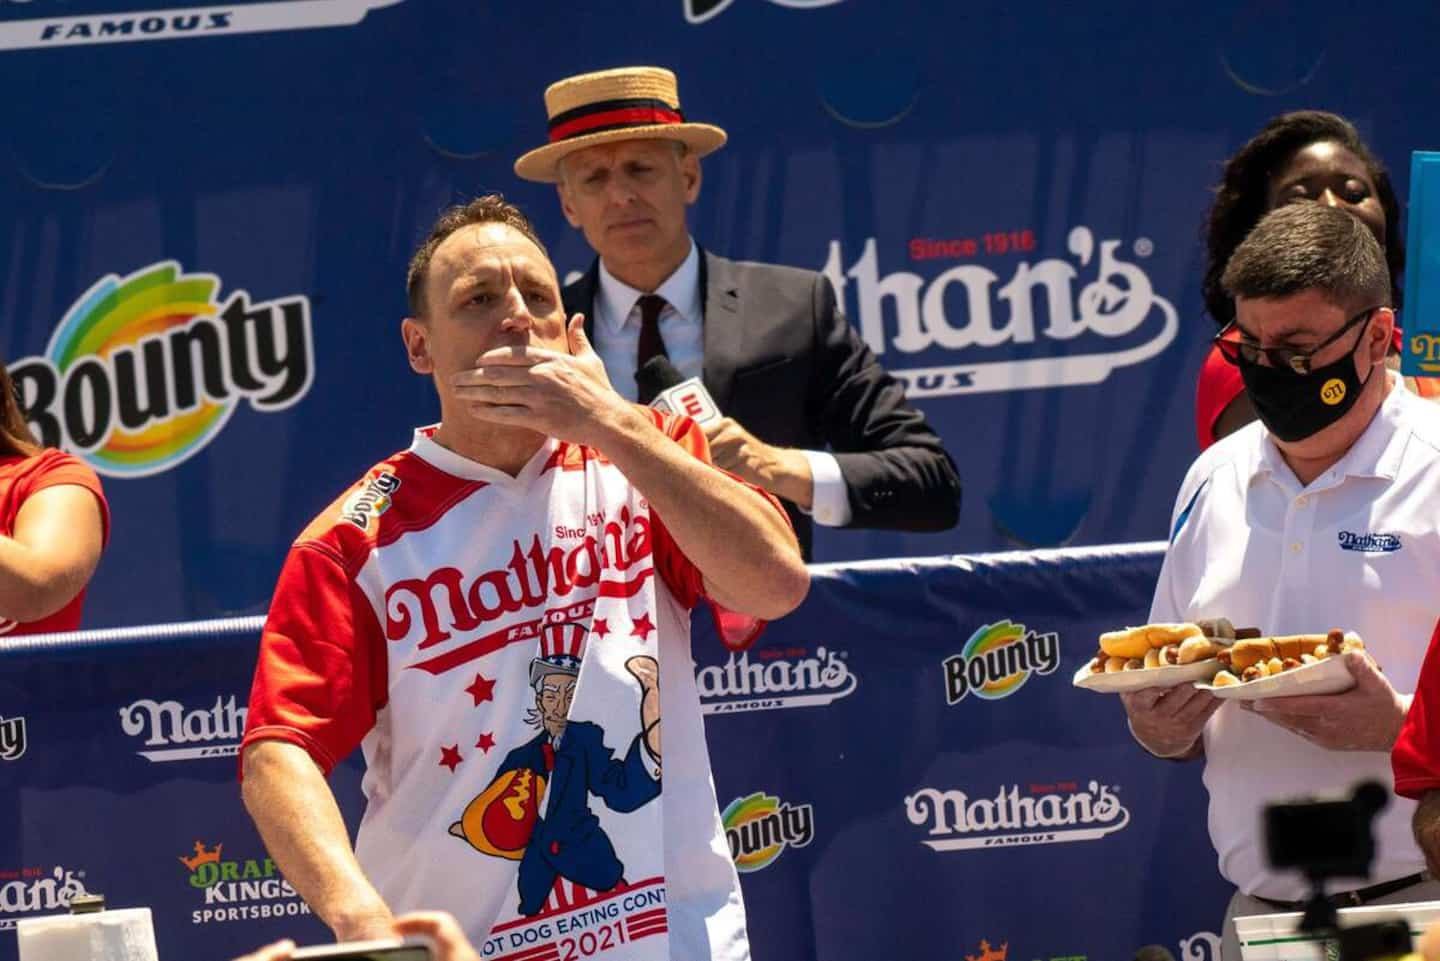 And 15 for Joey Chestnut!